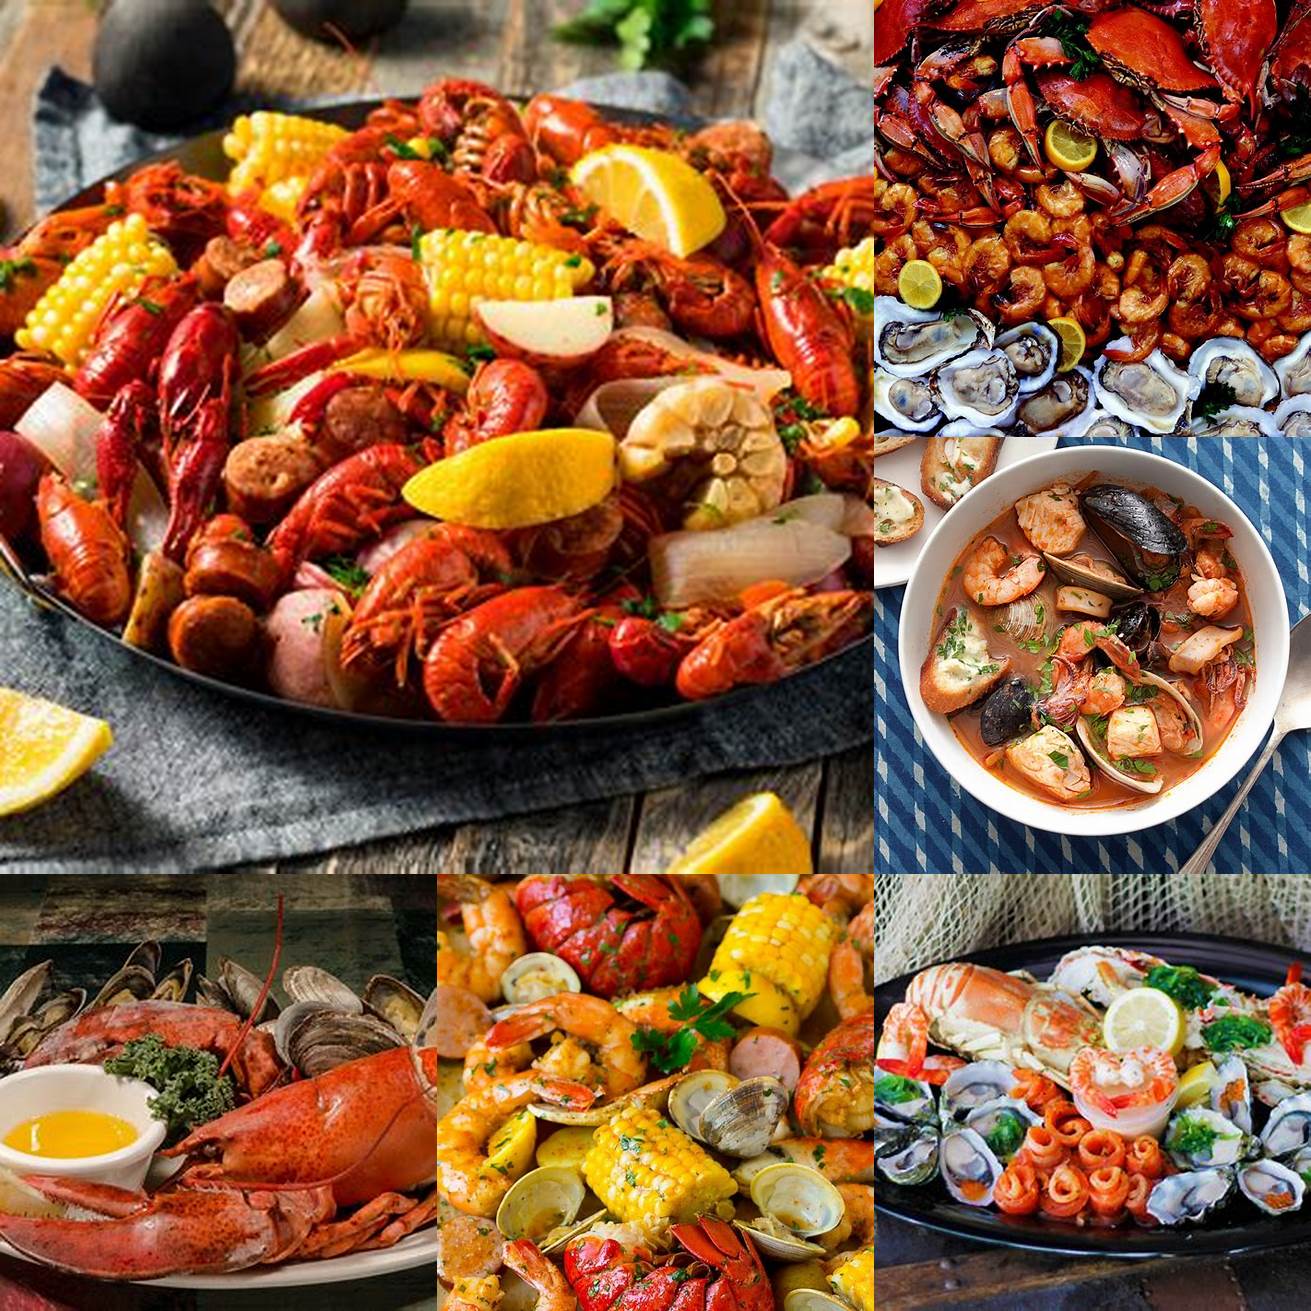 Seafood With its long coastline seafood is an important part of American cuisine Popular seafood dishes include clam chowder lobster rolls and shrimp and grits